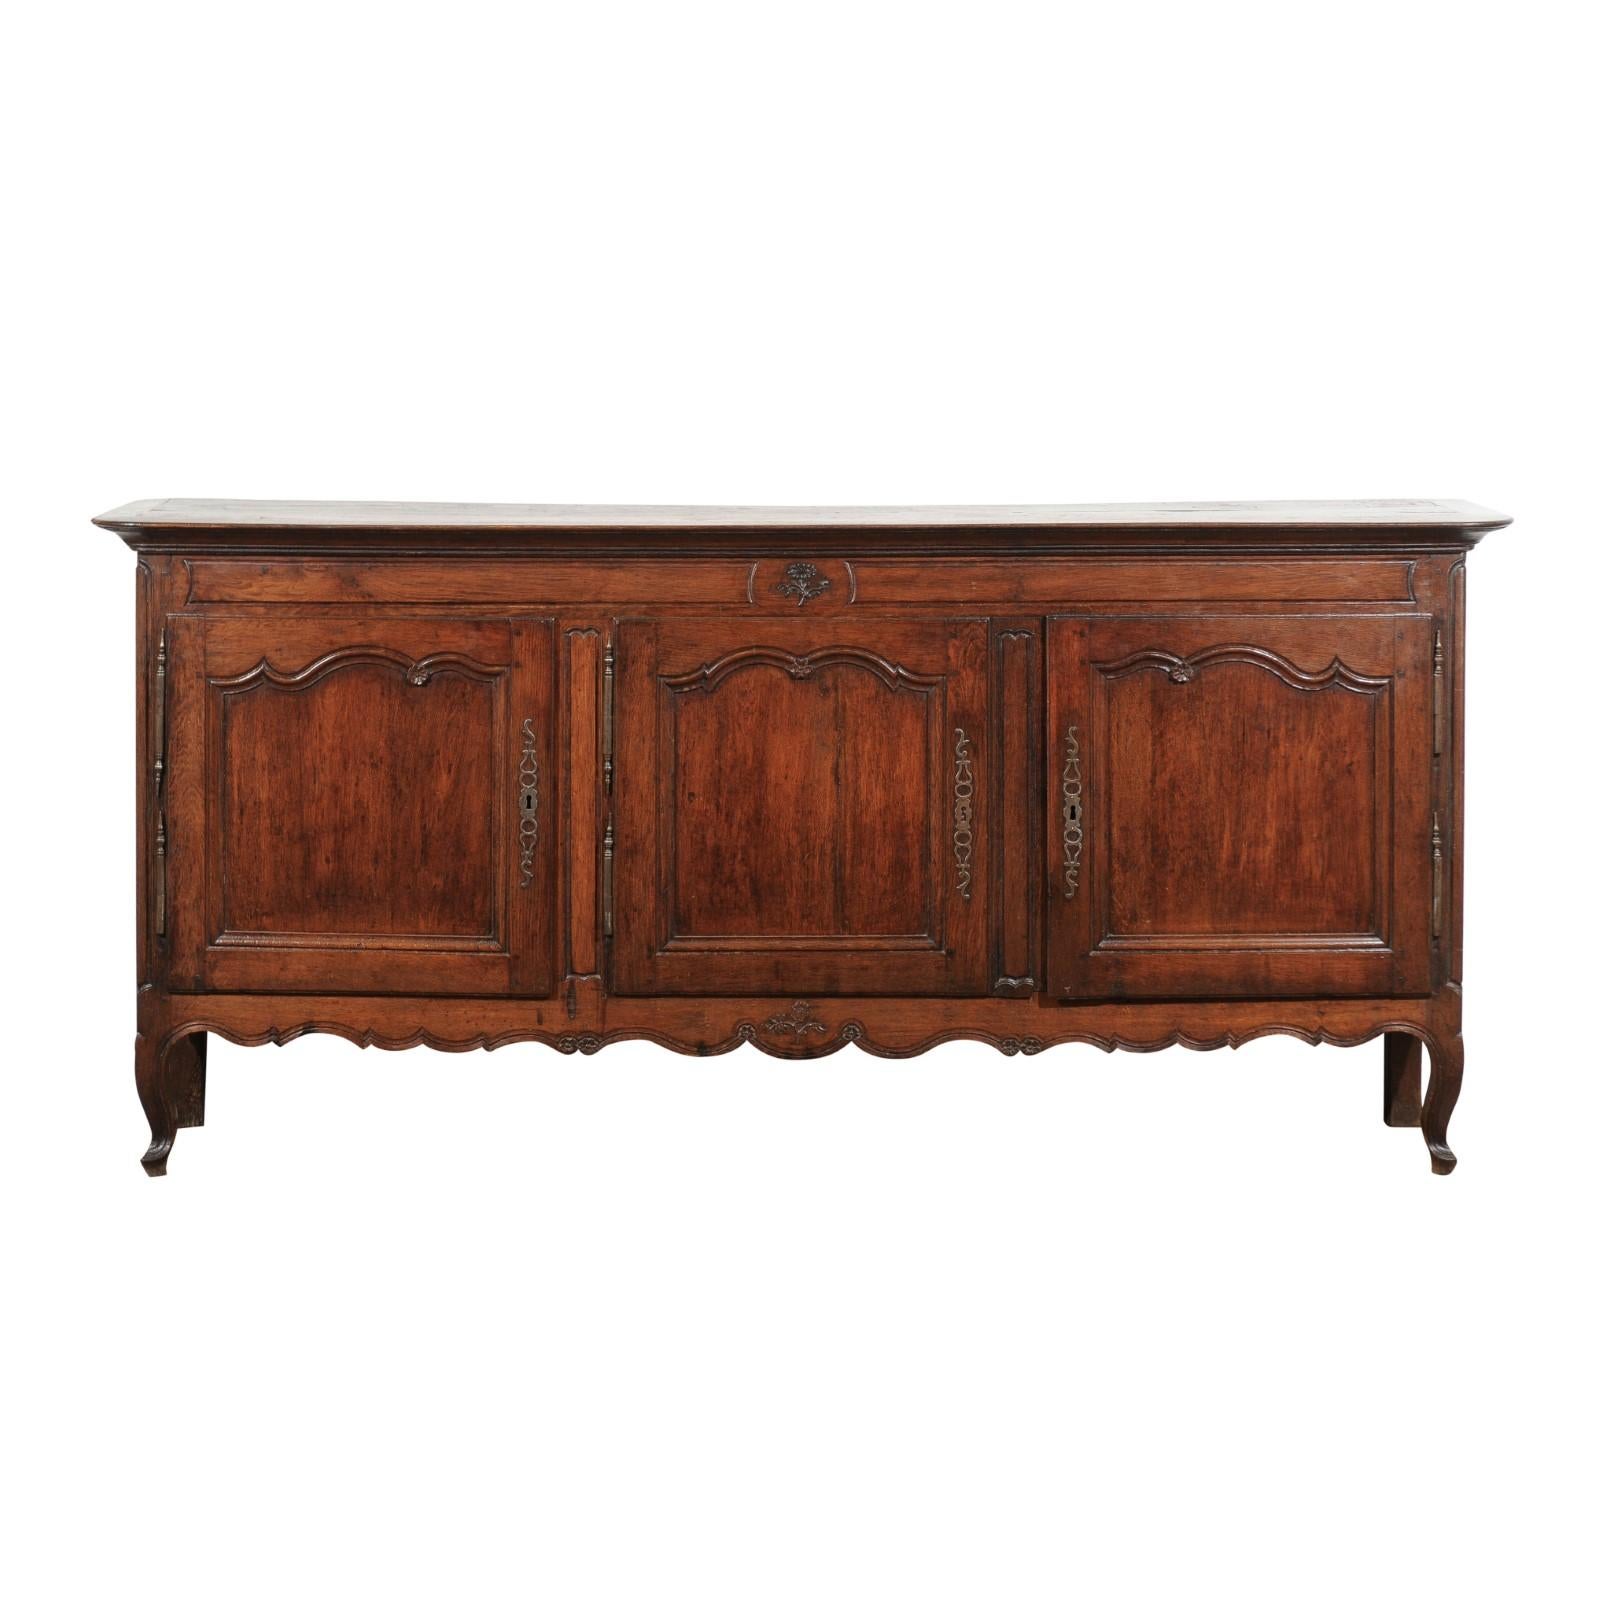 French, 19th Century Louis XV Style Chestnut Enfilade with Original Hardware 17